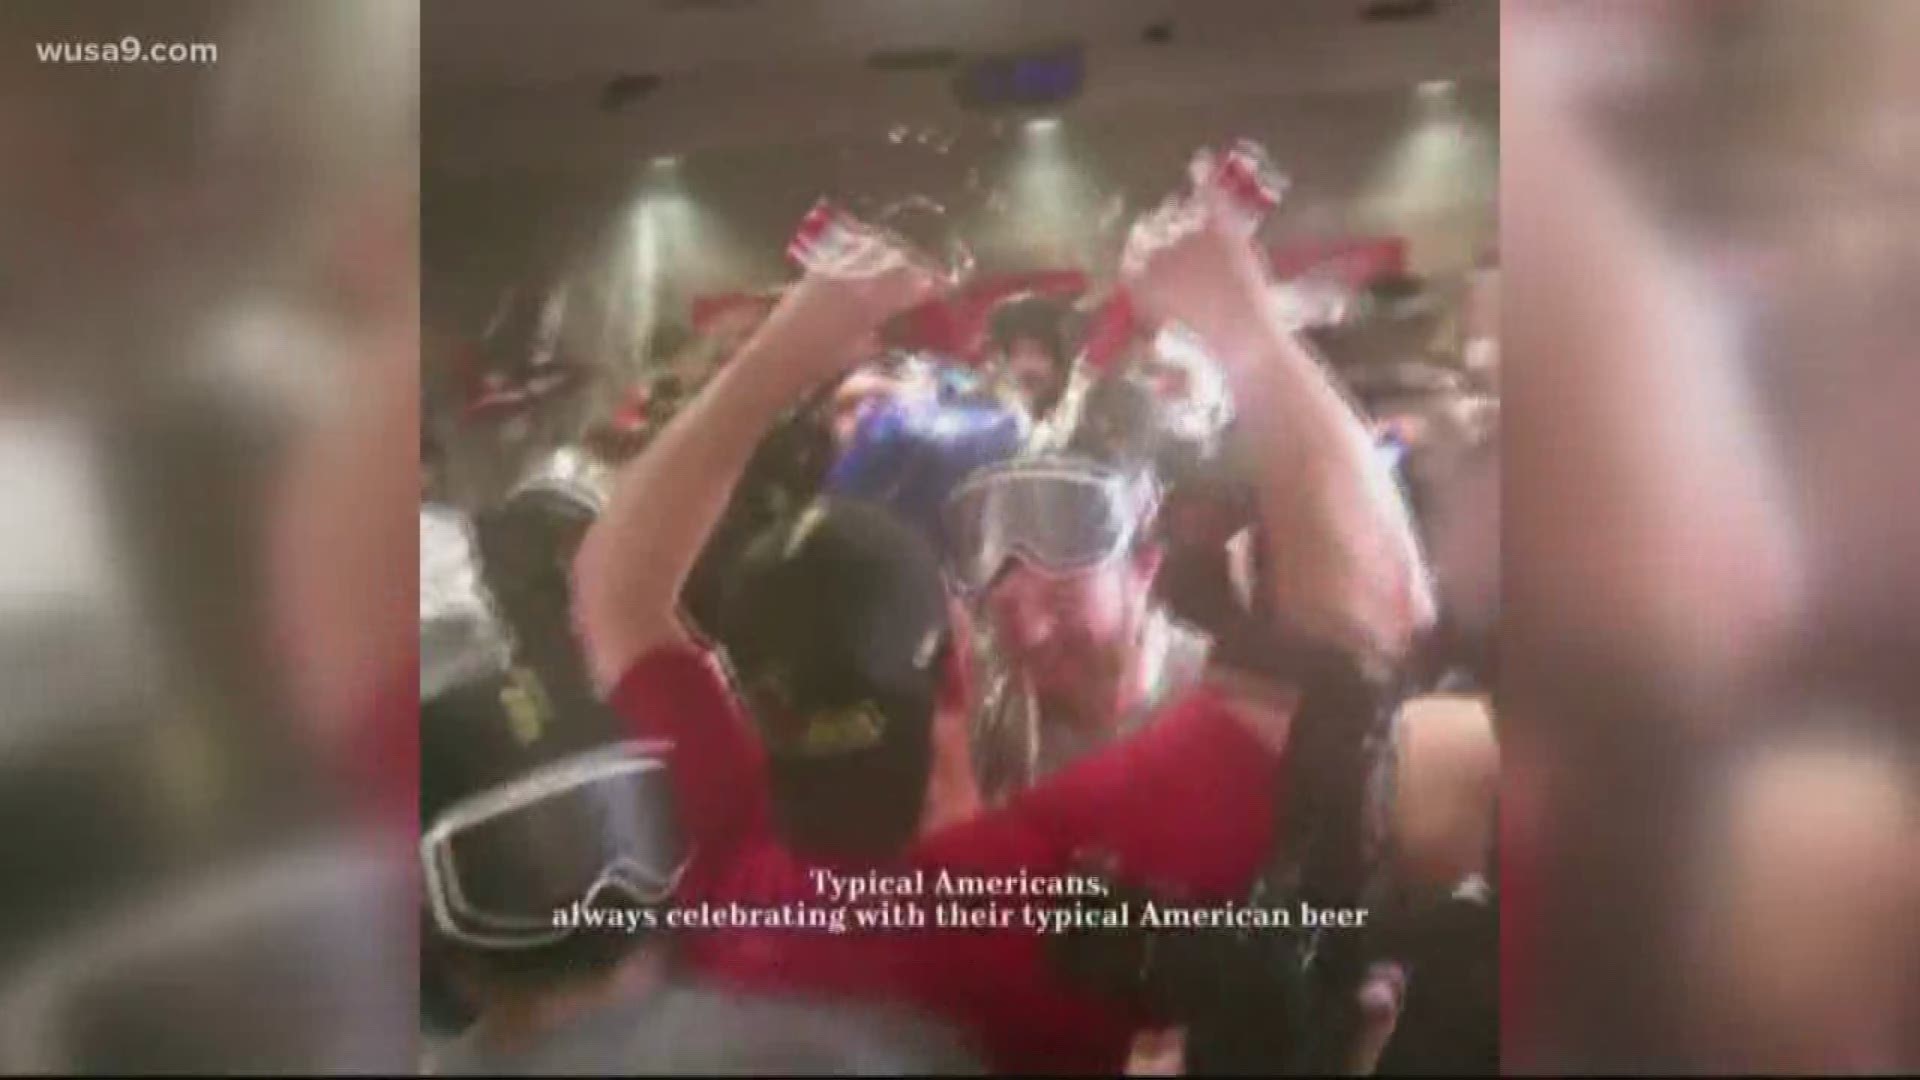 Aaron Barrett and the Washington Nationals will appear in a Budweiser commercial that will air during the Super Bowl.